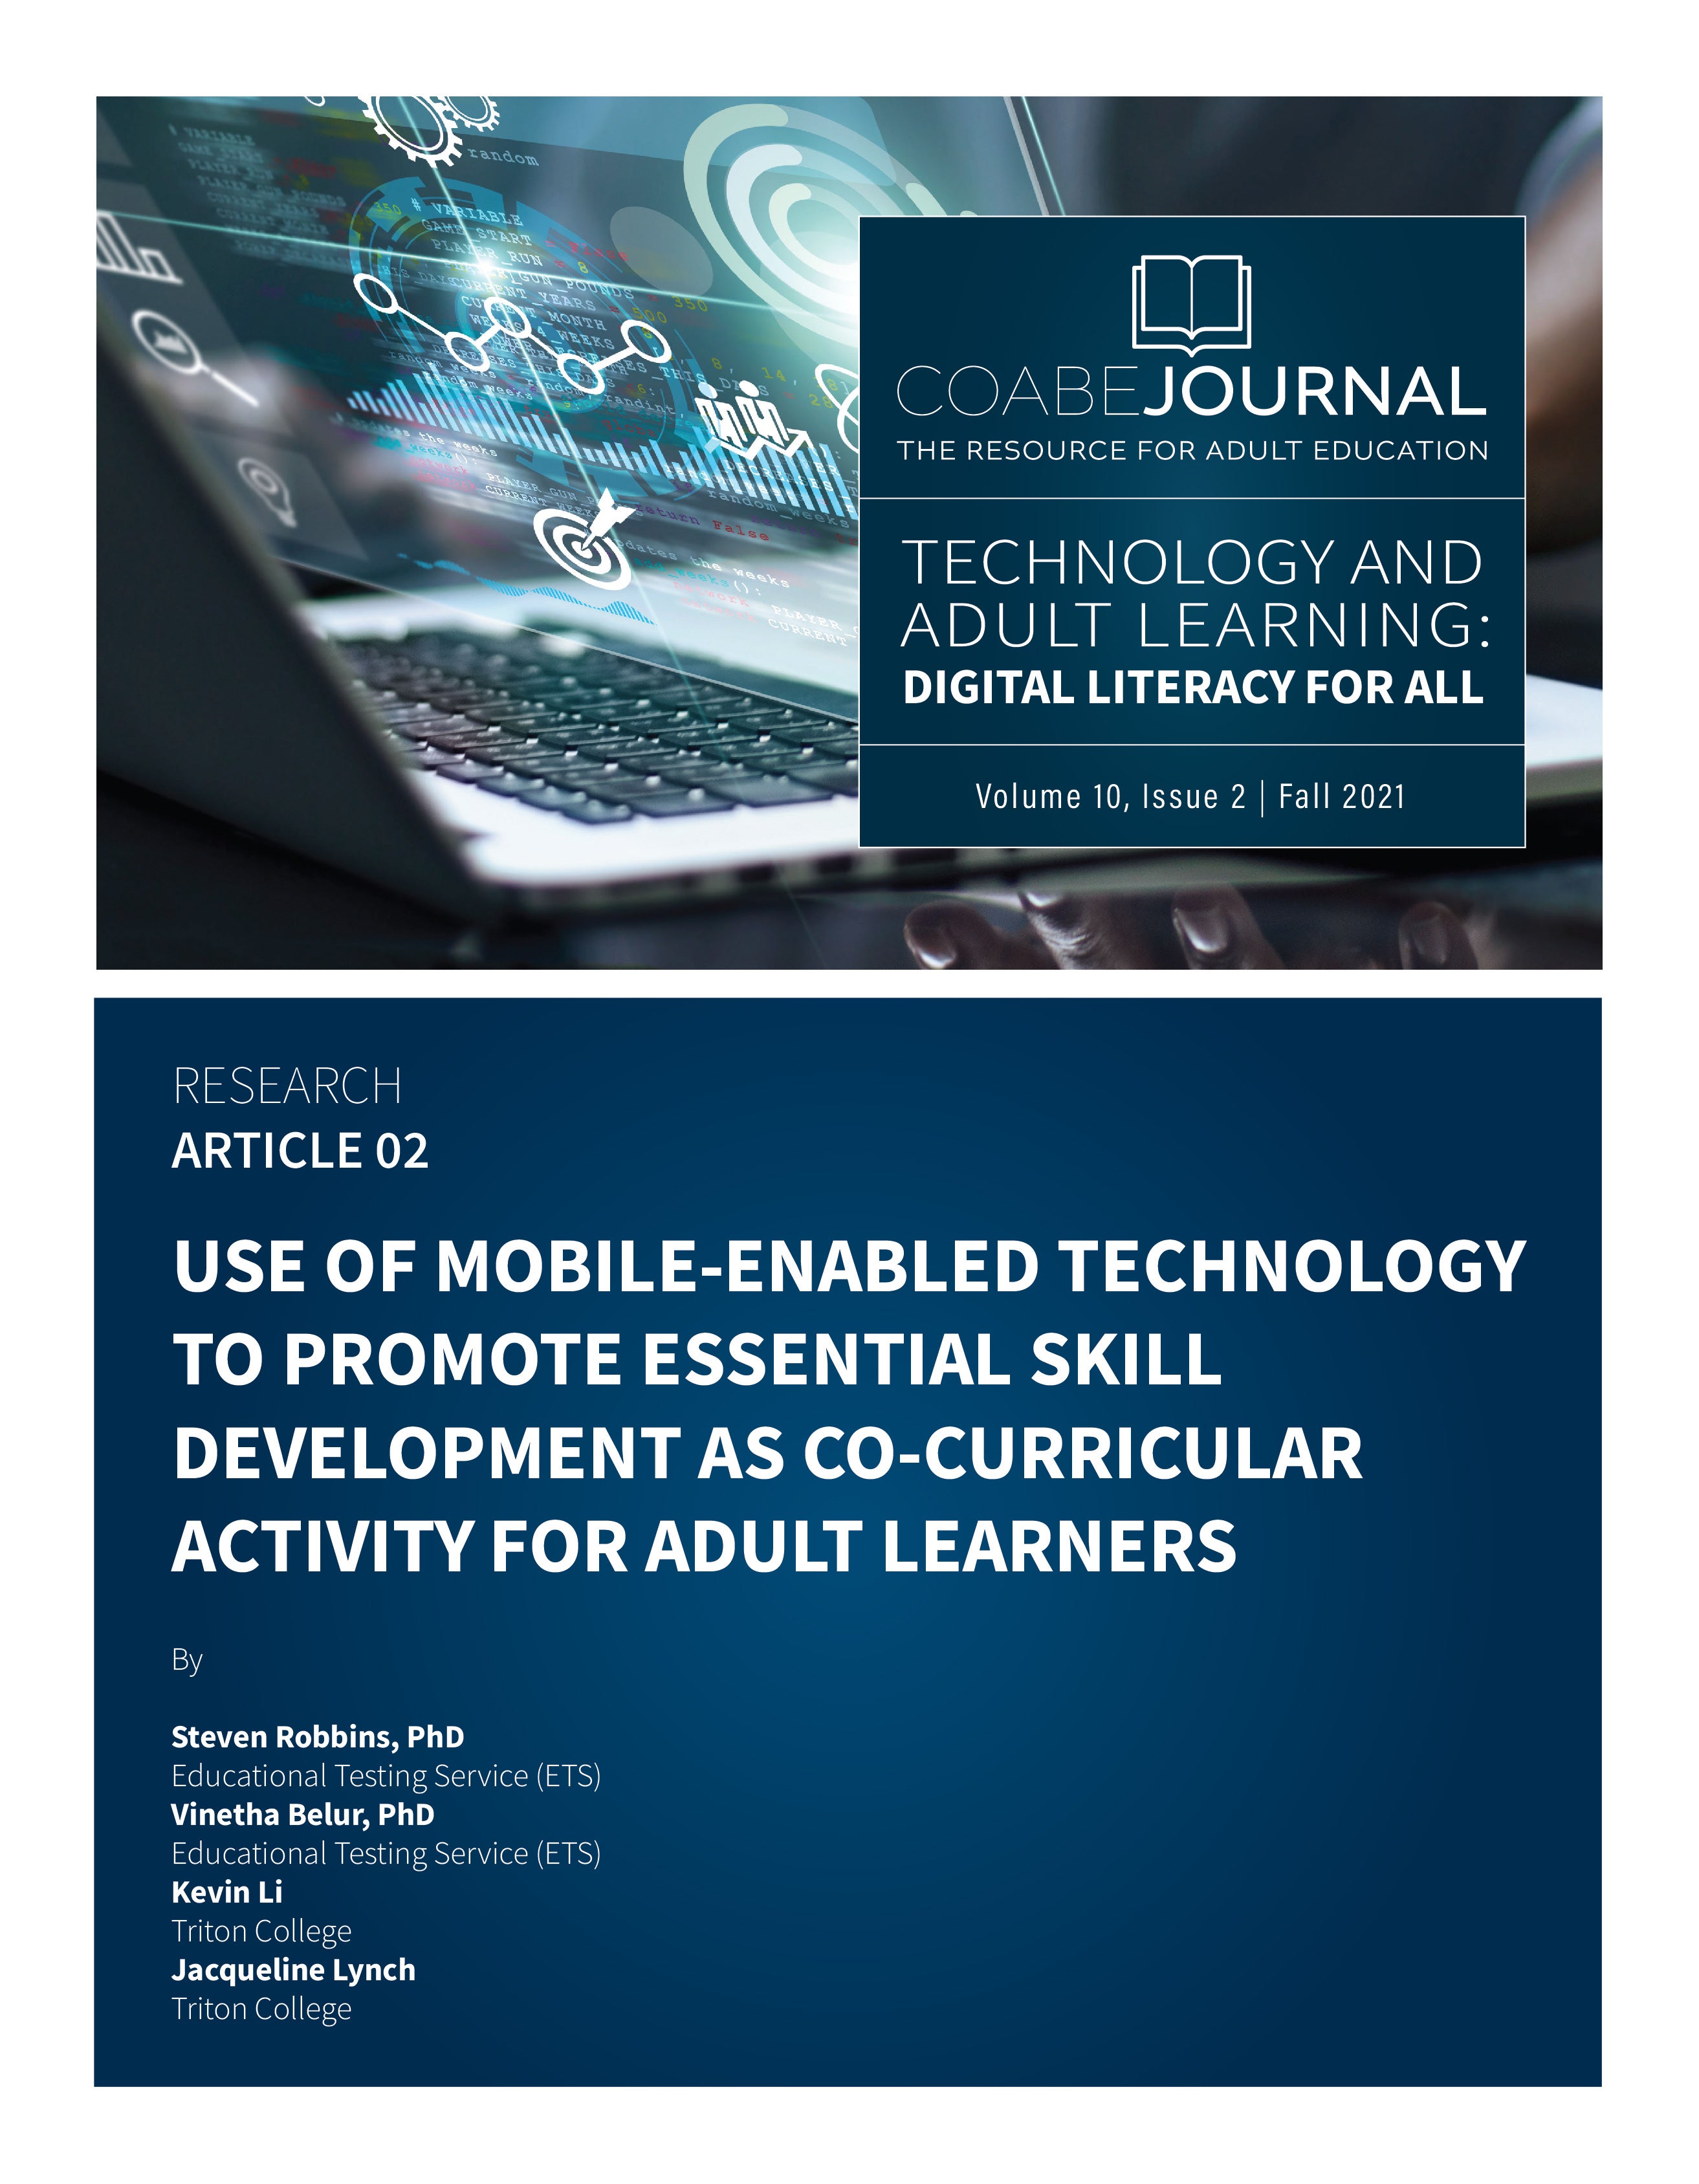 Article 02 | Use Of Mobile-Enabled Technology To Promote Essential Skill Development As Co-Curricular Activity For Adult Learners